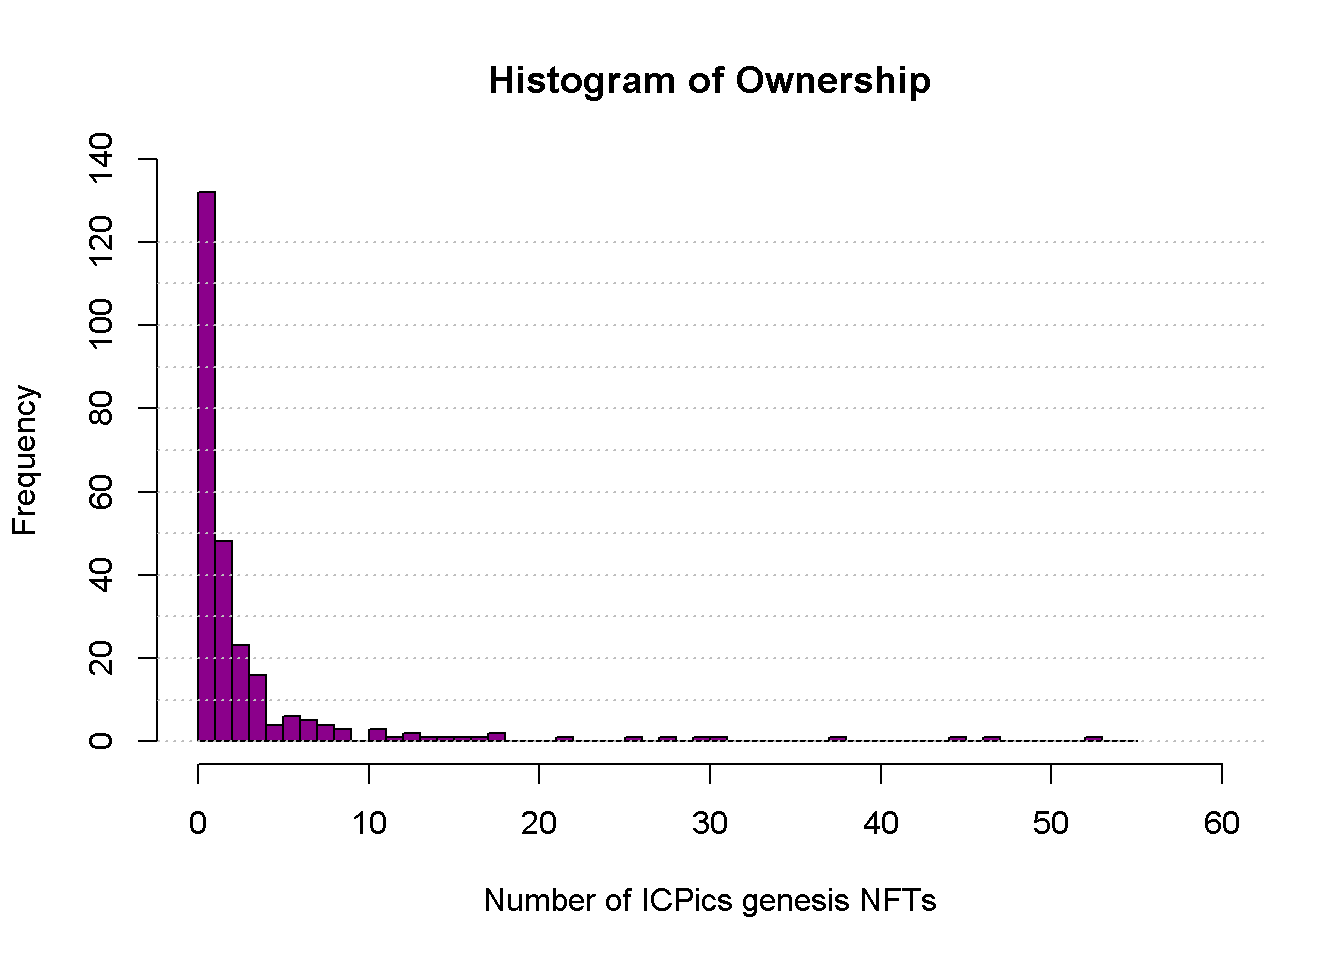 Frequency distribution of ICPics on snapshot date.